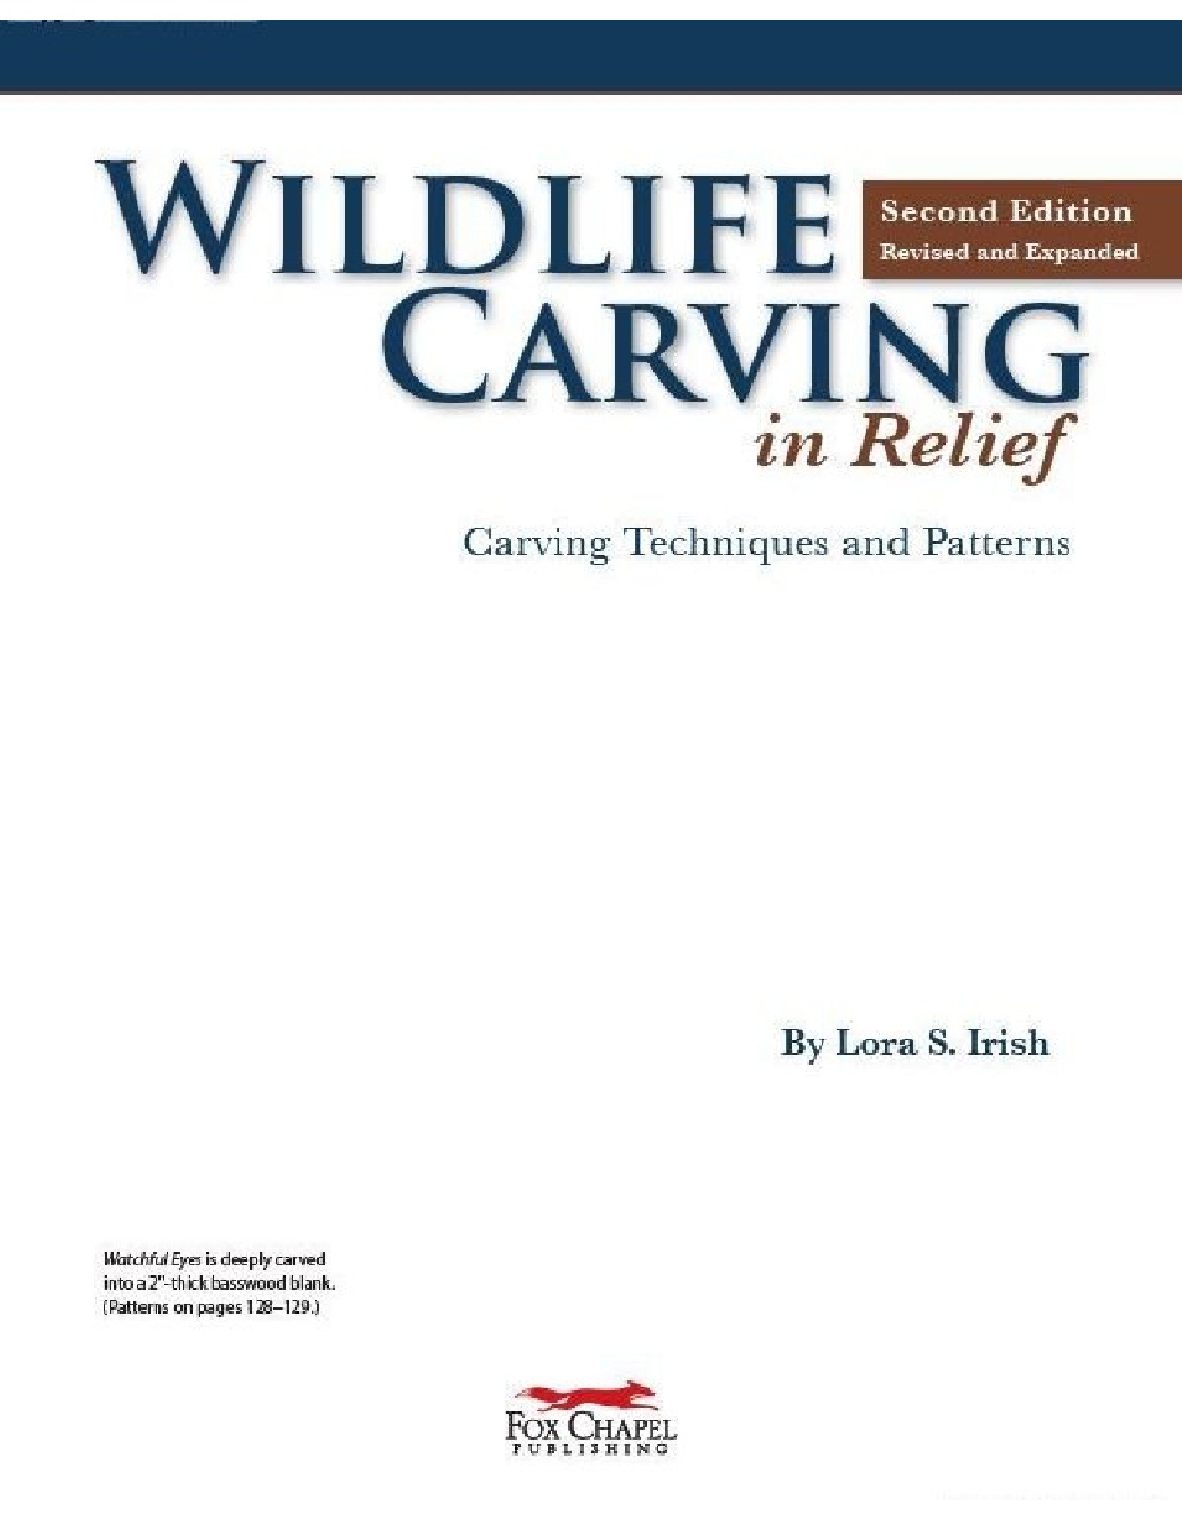 Wildlife Carving in Relief, Second Edition Revised and Expanded 2009_在救助野生动物雕刻